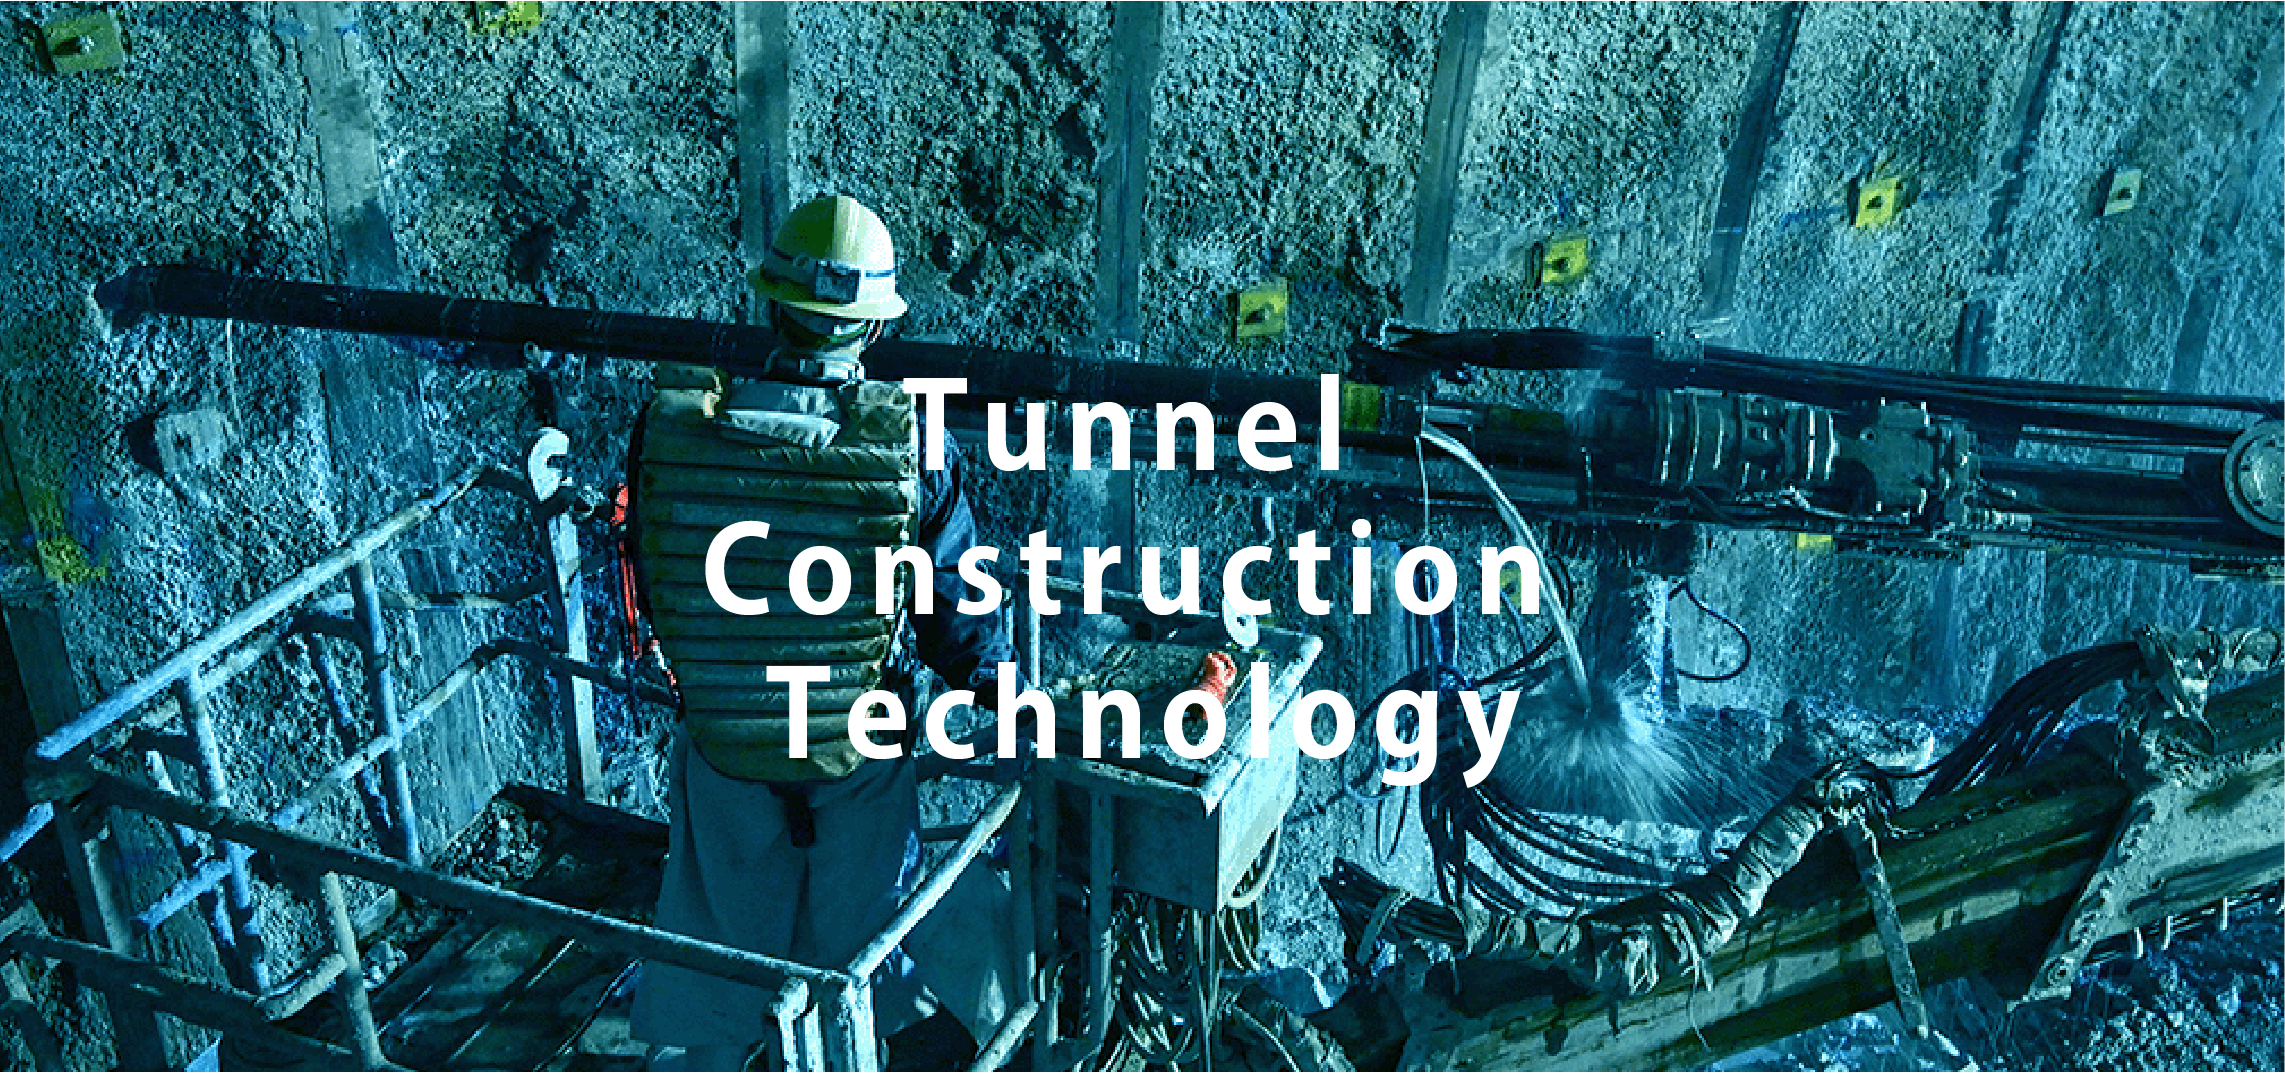 Tunnel Construction Technology